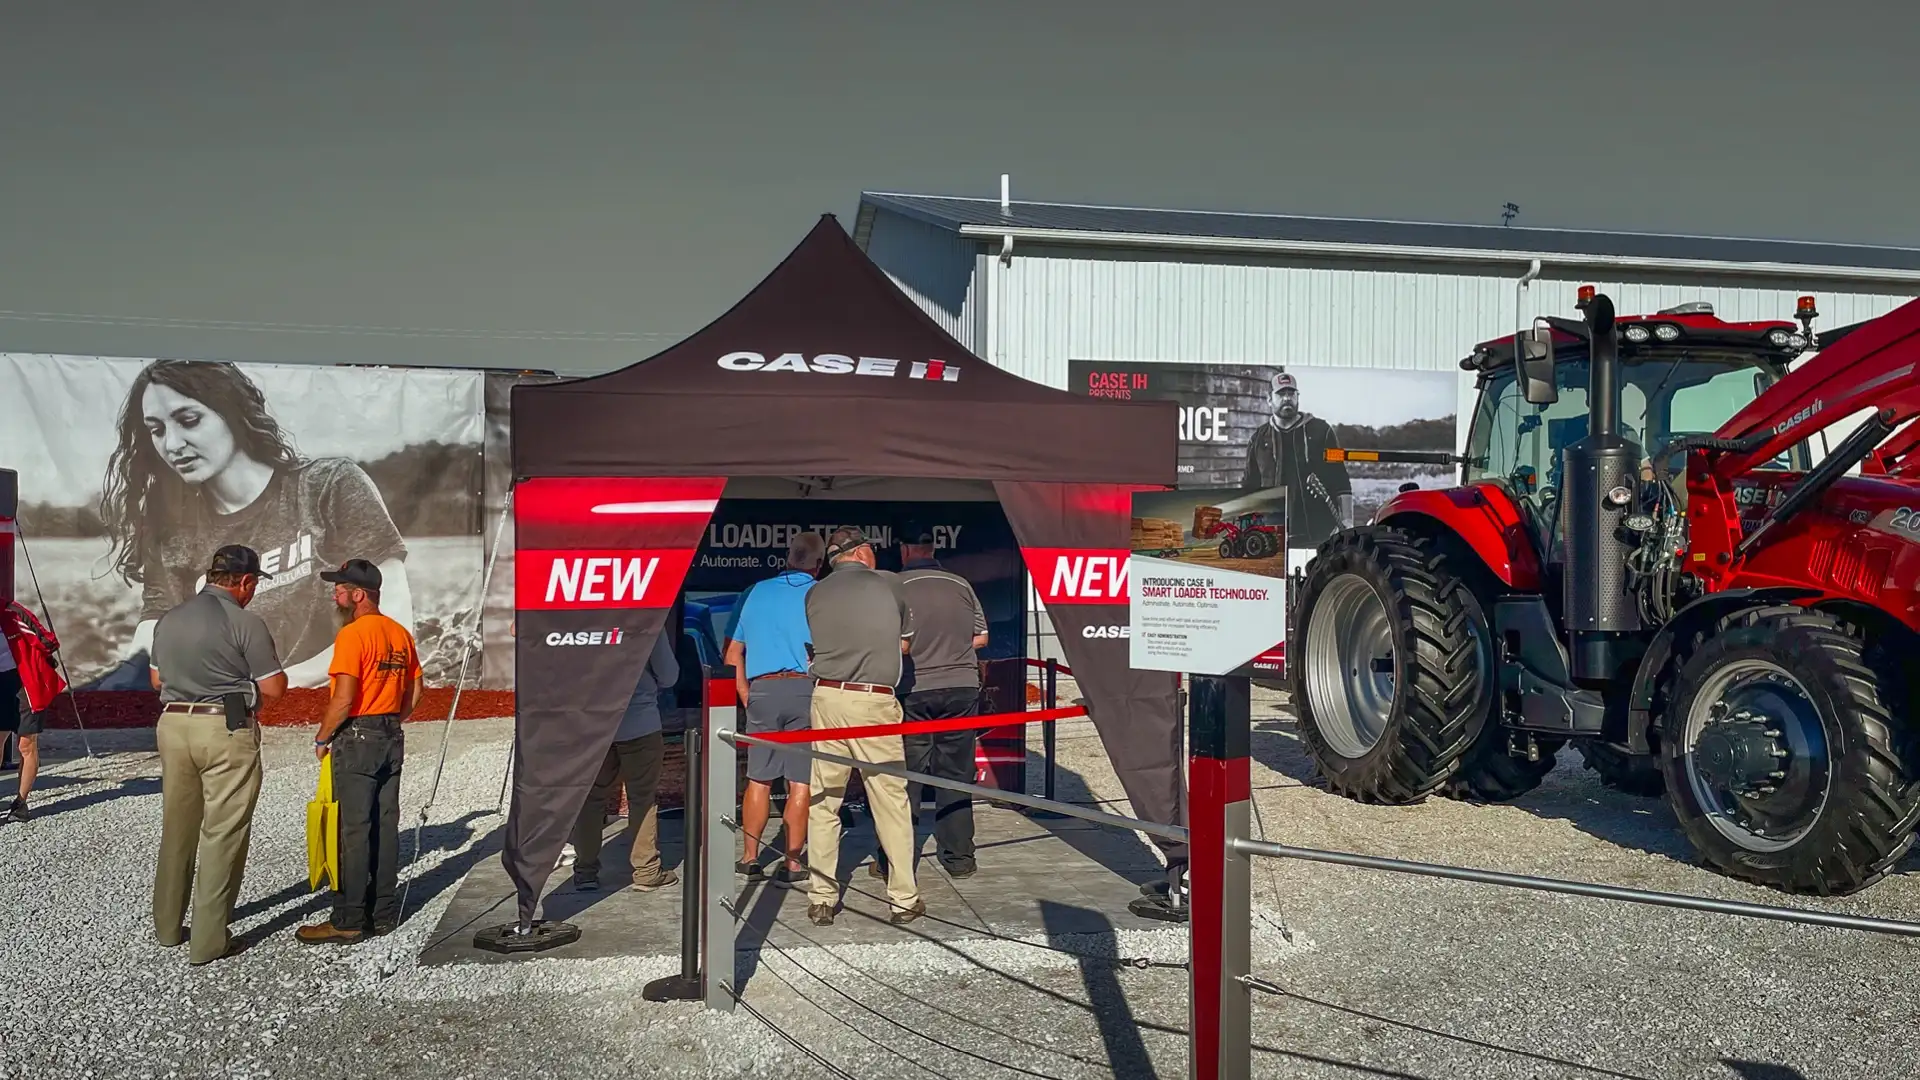 Image of Case IH Tent at Farm show